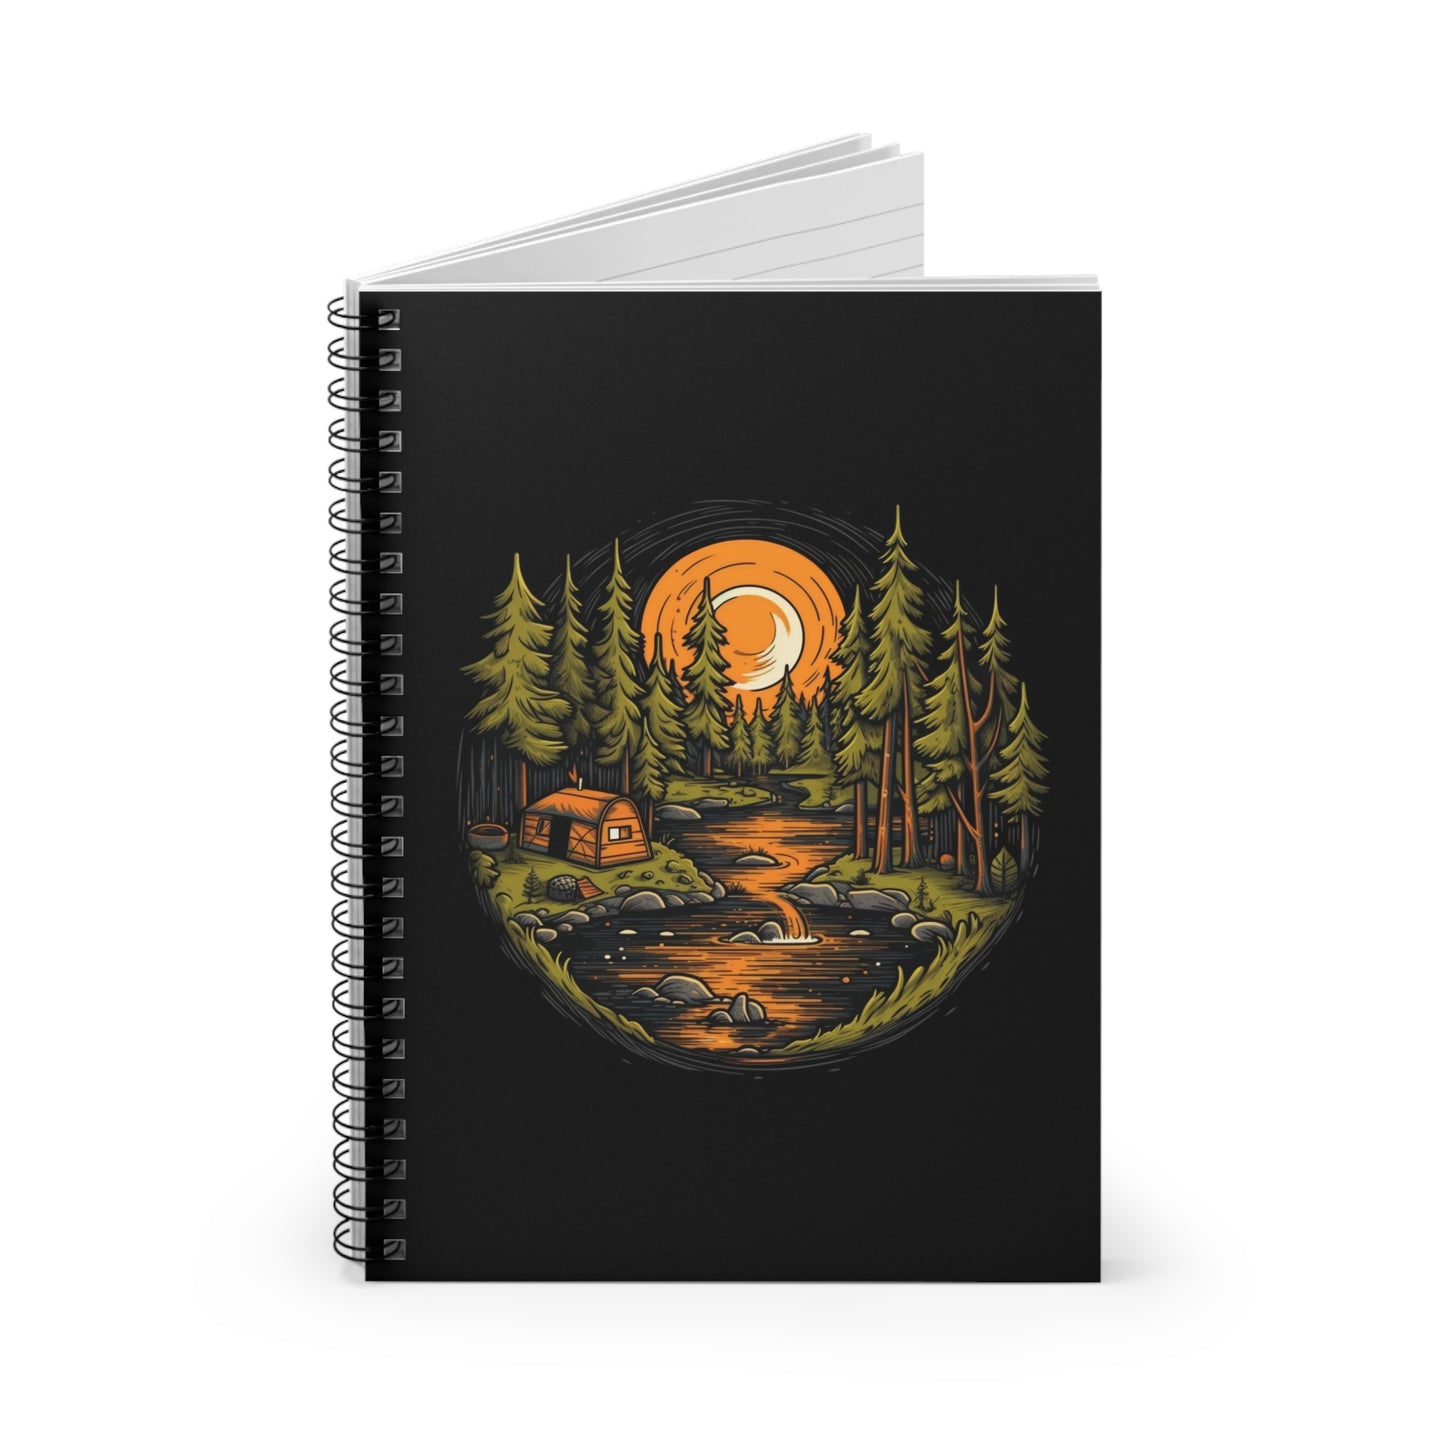 Camping Journal, Campfire Tales Metal Spiral Notebook, Adventure Journal, Camping Diary, Travel Journal, Dream Journal, Ruled Line